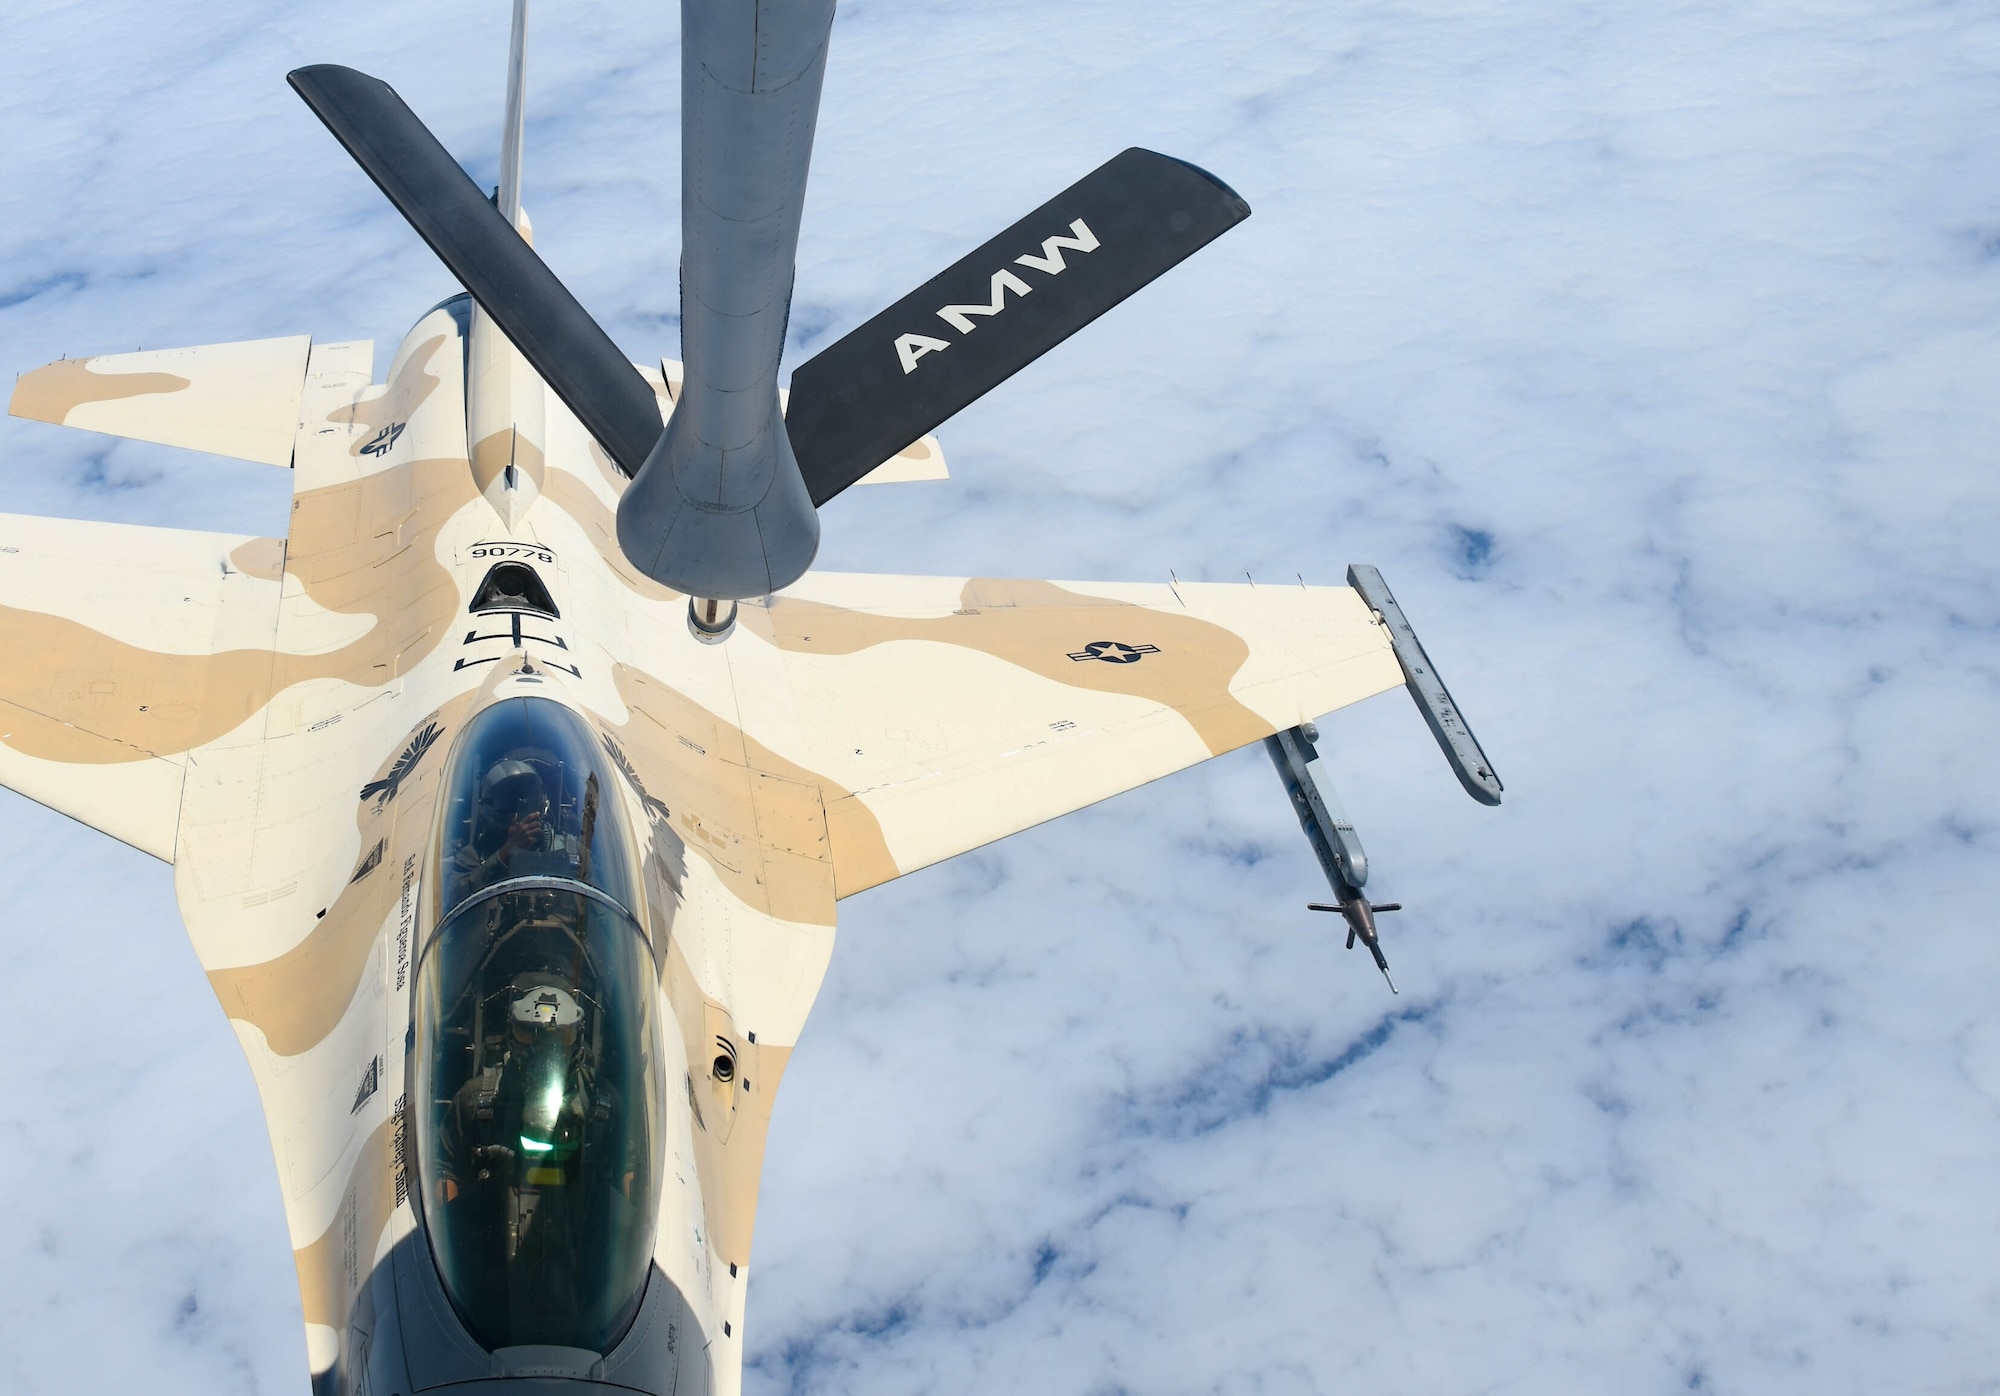 A U.S. Air Force F-16 Fighting Falcon from the 310th Fighter Squadron at Luke Air Force Base (AFB), Arizona, prepares to take fuel from a KC-135 Stratotanker, The KC-135 aircrew from the 54th Air Refueling Squadron at Altus AFB refueled more than 15 F-16s. (U.S. Air Force photo by Airman 1st Class Trenton Jancze)